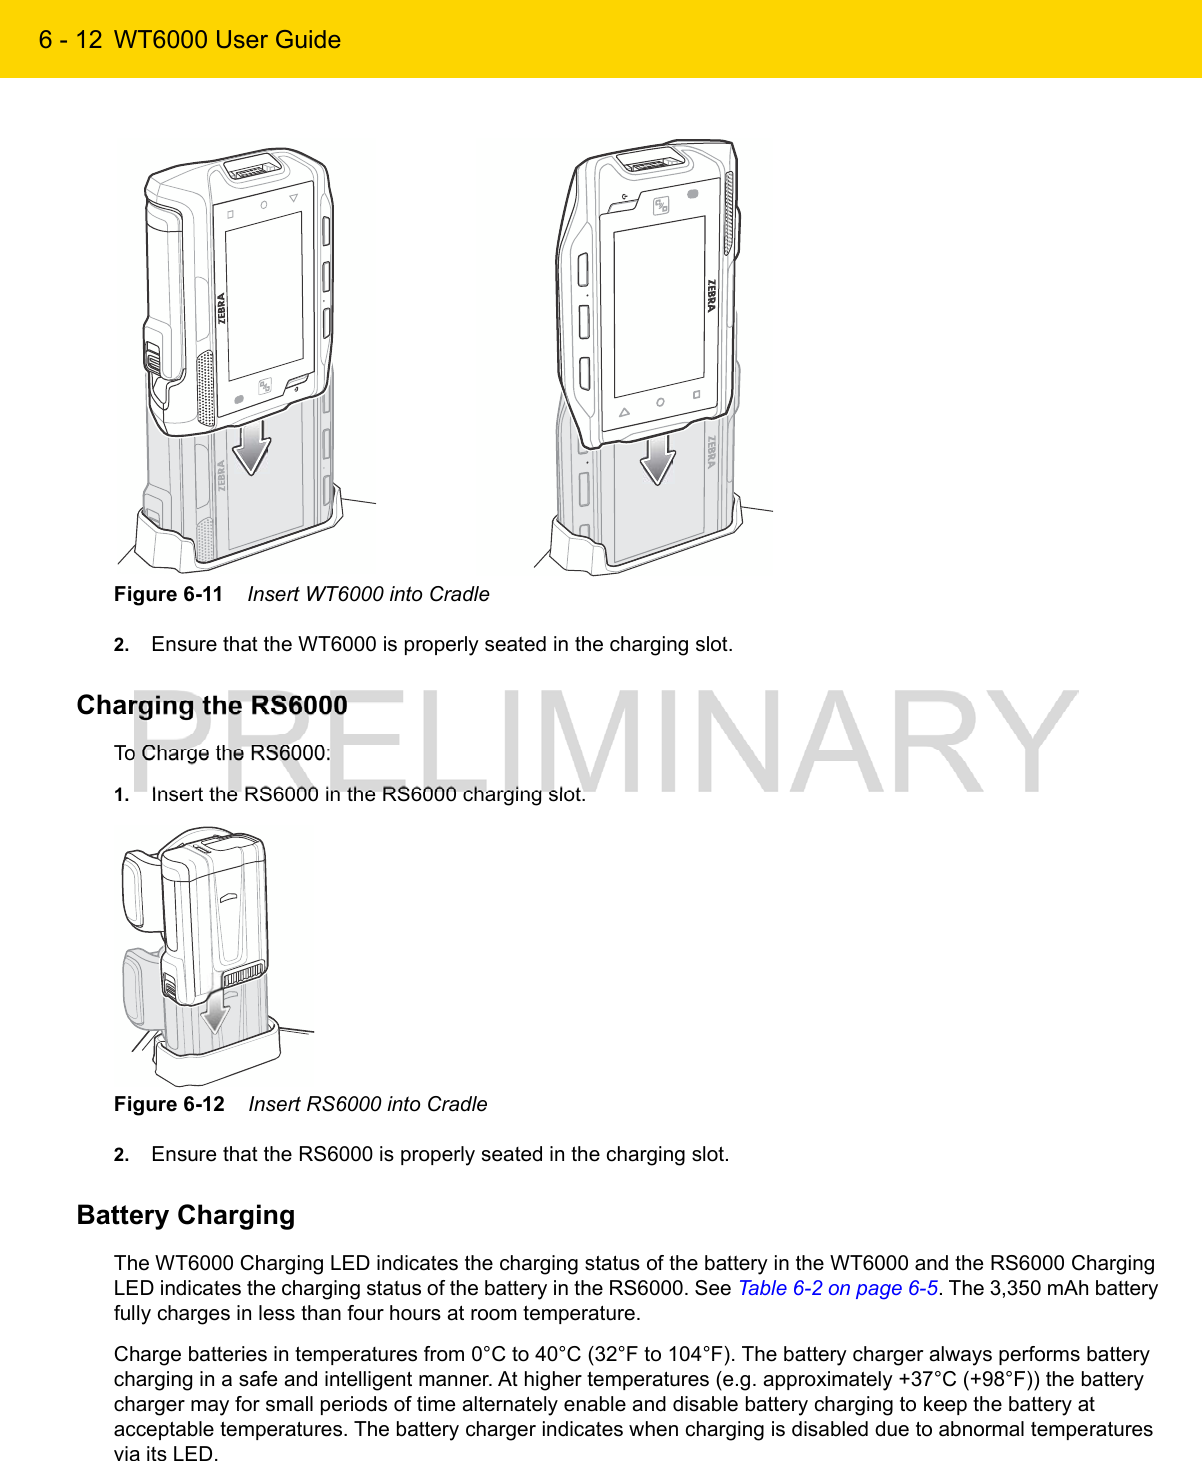 6 - 12 WT6000 User GuideFigure 6-11    Insert WT6000 into Cradle2. Ensure that the WT6000 is properly seated in the charging slot.Charging the RS6000To Charge the RS6000:1. Insert the RS6000 in the RS6000 charging slot.Figure 6-12    Insert RS6000 into Cradle2. Ensure that the RS6000 is properly seated in the charging slot.Battery ChargingThe WT6000 Charging LED indicates the charging status of the battery in the WT6000 and the RS6000 Charging LED indicates the charging status of the battery in the RS6000. See Table 6-2 on page 6-5. The 3,350 mAh battery fully charges in less than four hours at room temperature.Charge batteries in temperatures from 0°C to 40°C (32°F to 104°F). The battery charger always performs battery charging in a safe and intelligent manner. At higher temperatures (e.g. approximately +37°C (+98°F)) the battery charger may for small periods of time alternately enable and disable battery charging to keep the battery at acceptable temperatures. The battery charger indicates when charging is disabled due to abnormal temperatures via its LED.